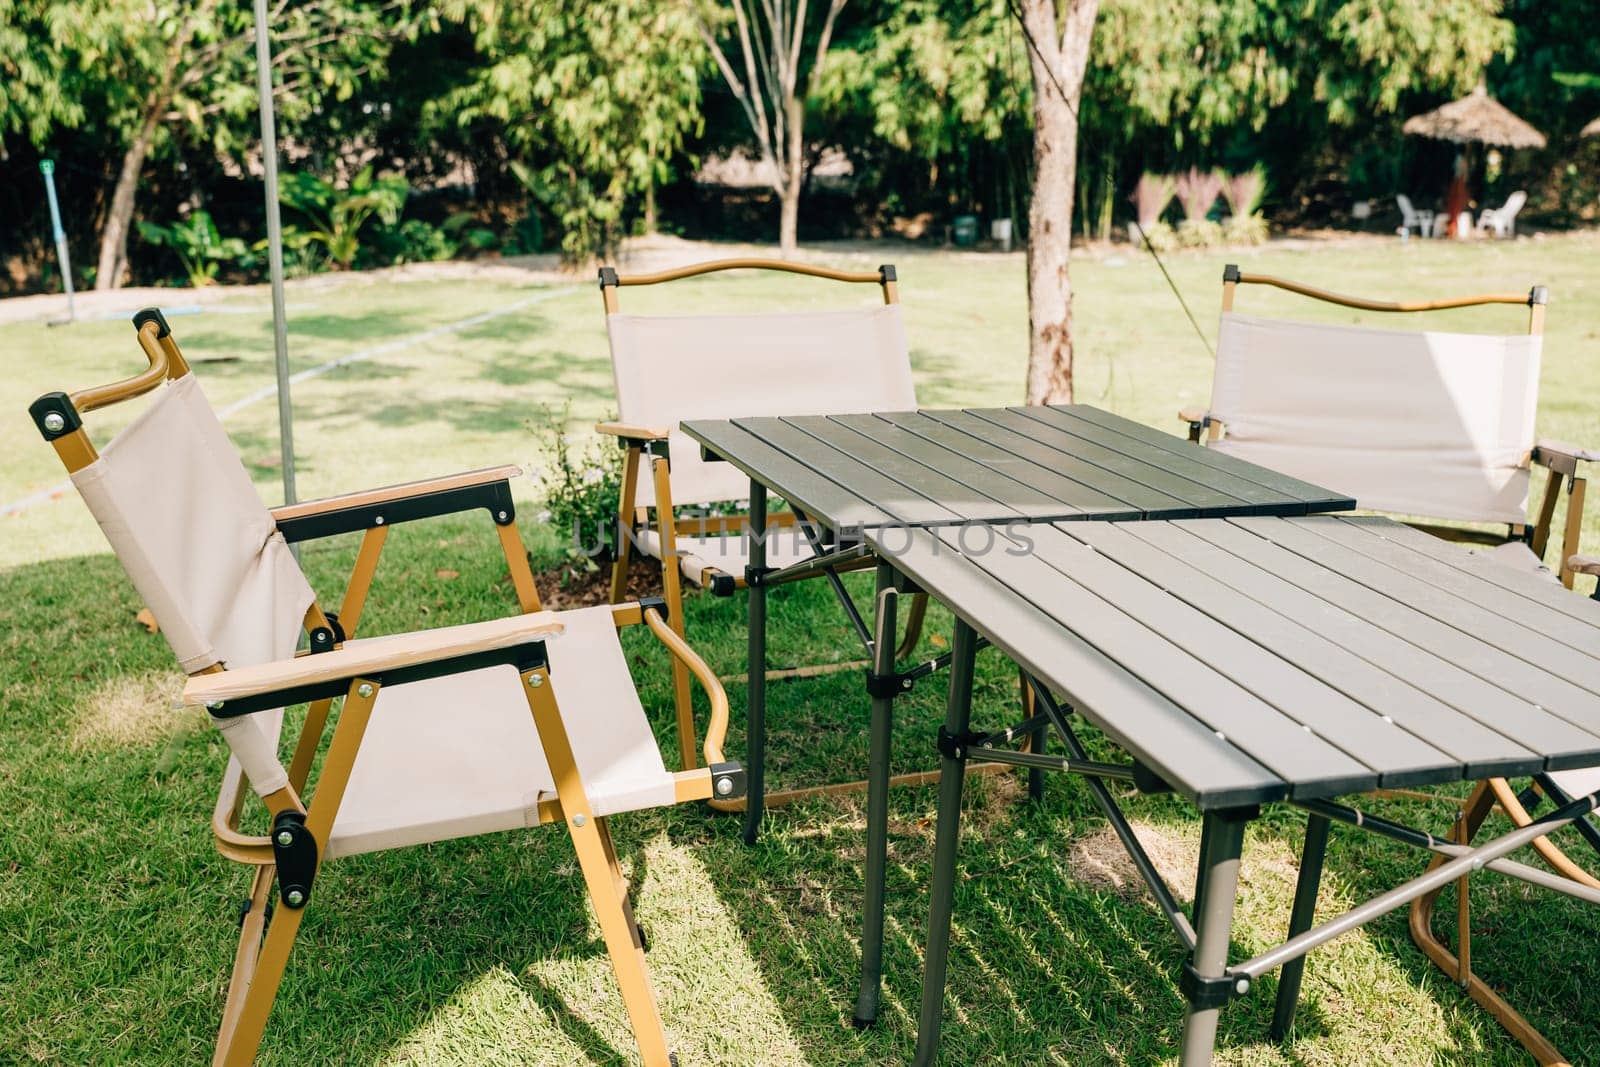 Experience the joy of outdoor camping with a tent, tables, and chairs for your summer picnic. This suburban patio setup provides comfortable seating and shade, perfect for relaxation.